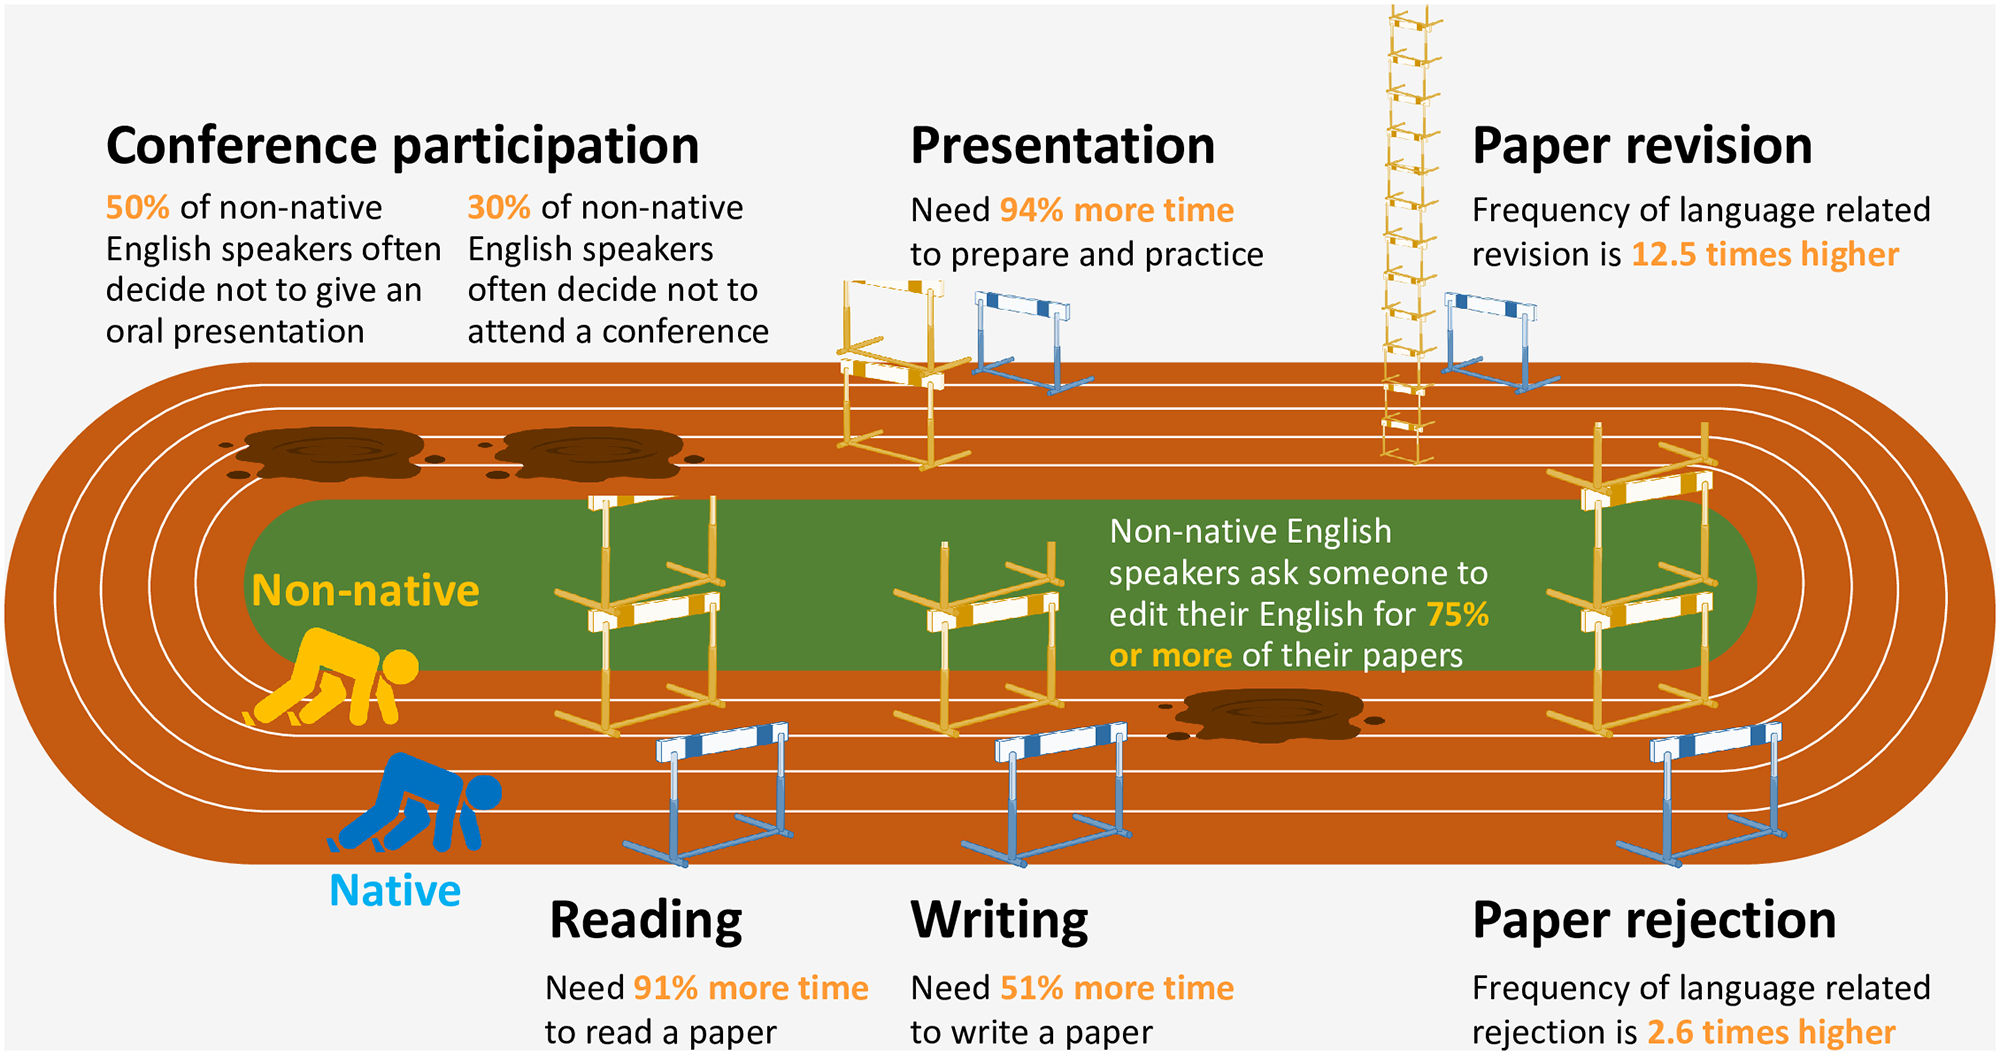 visual representation of the barriers faced by researchers using a metaphor of a track and field running event with hurdles